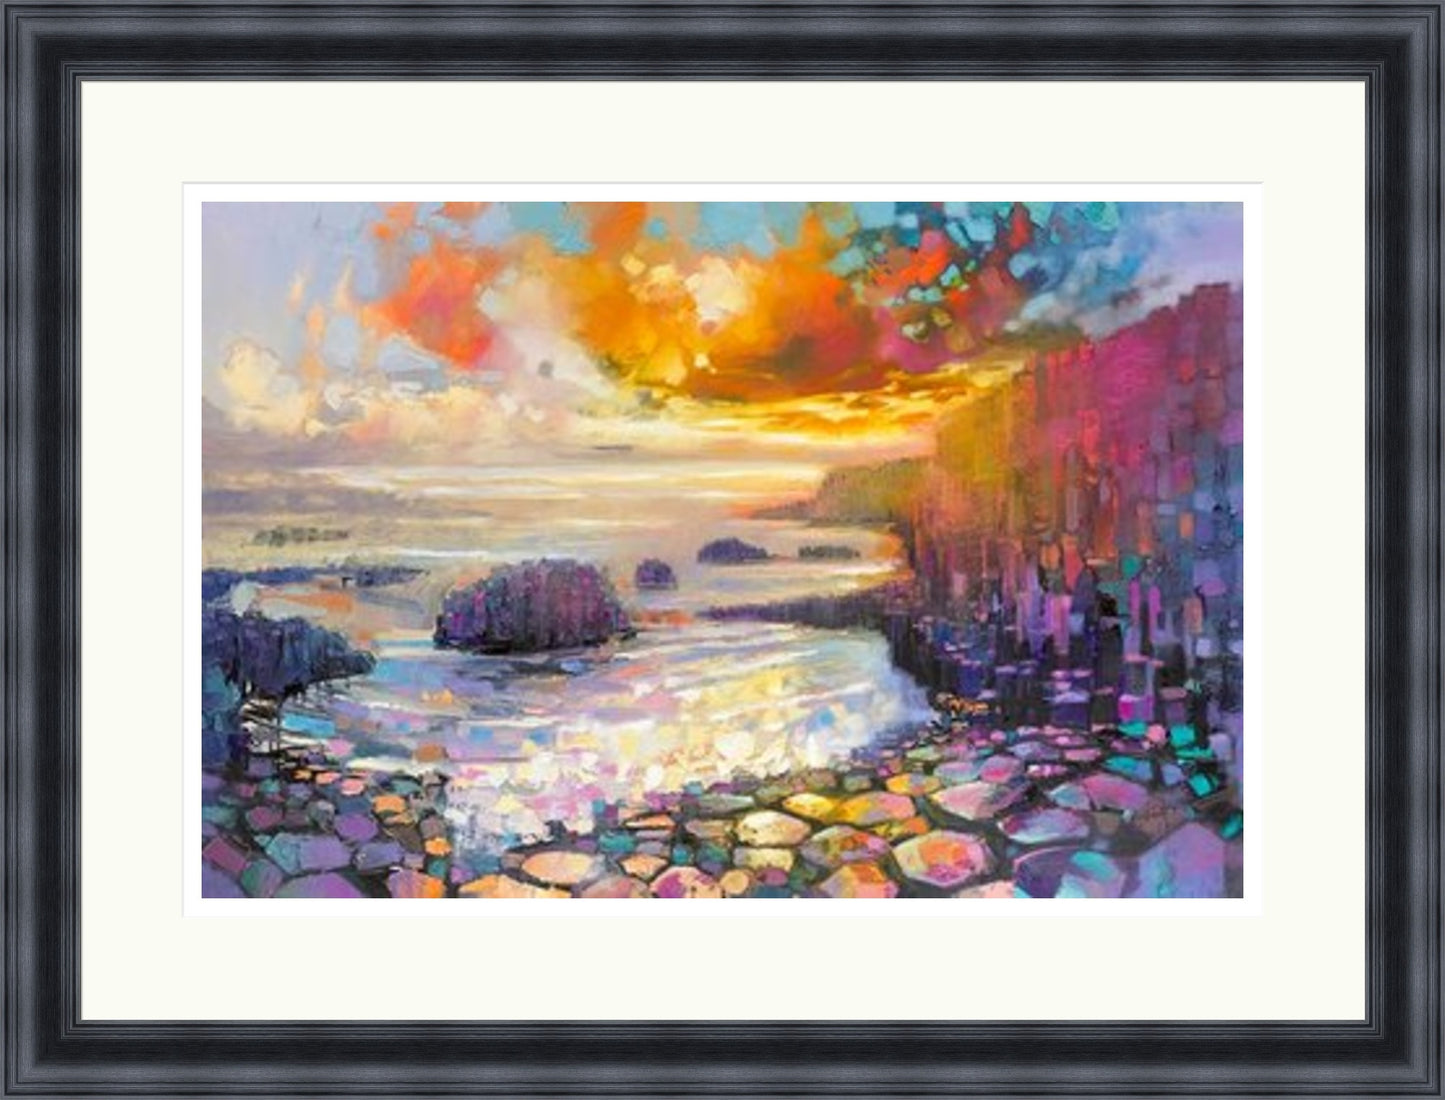 Giant's Causeway (Limited Edition) by Scott Naismith